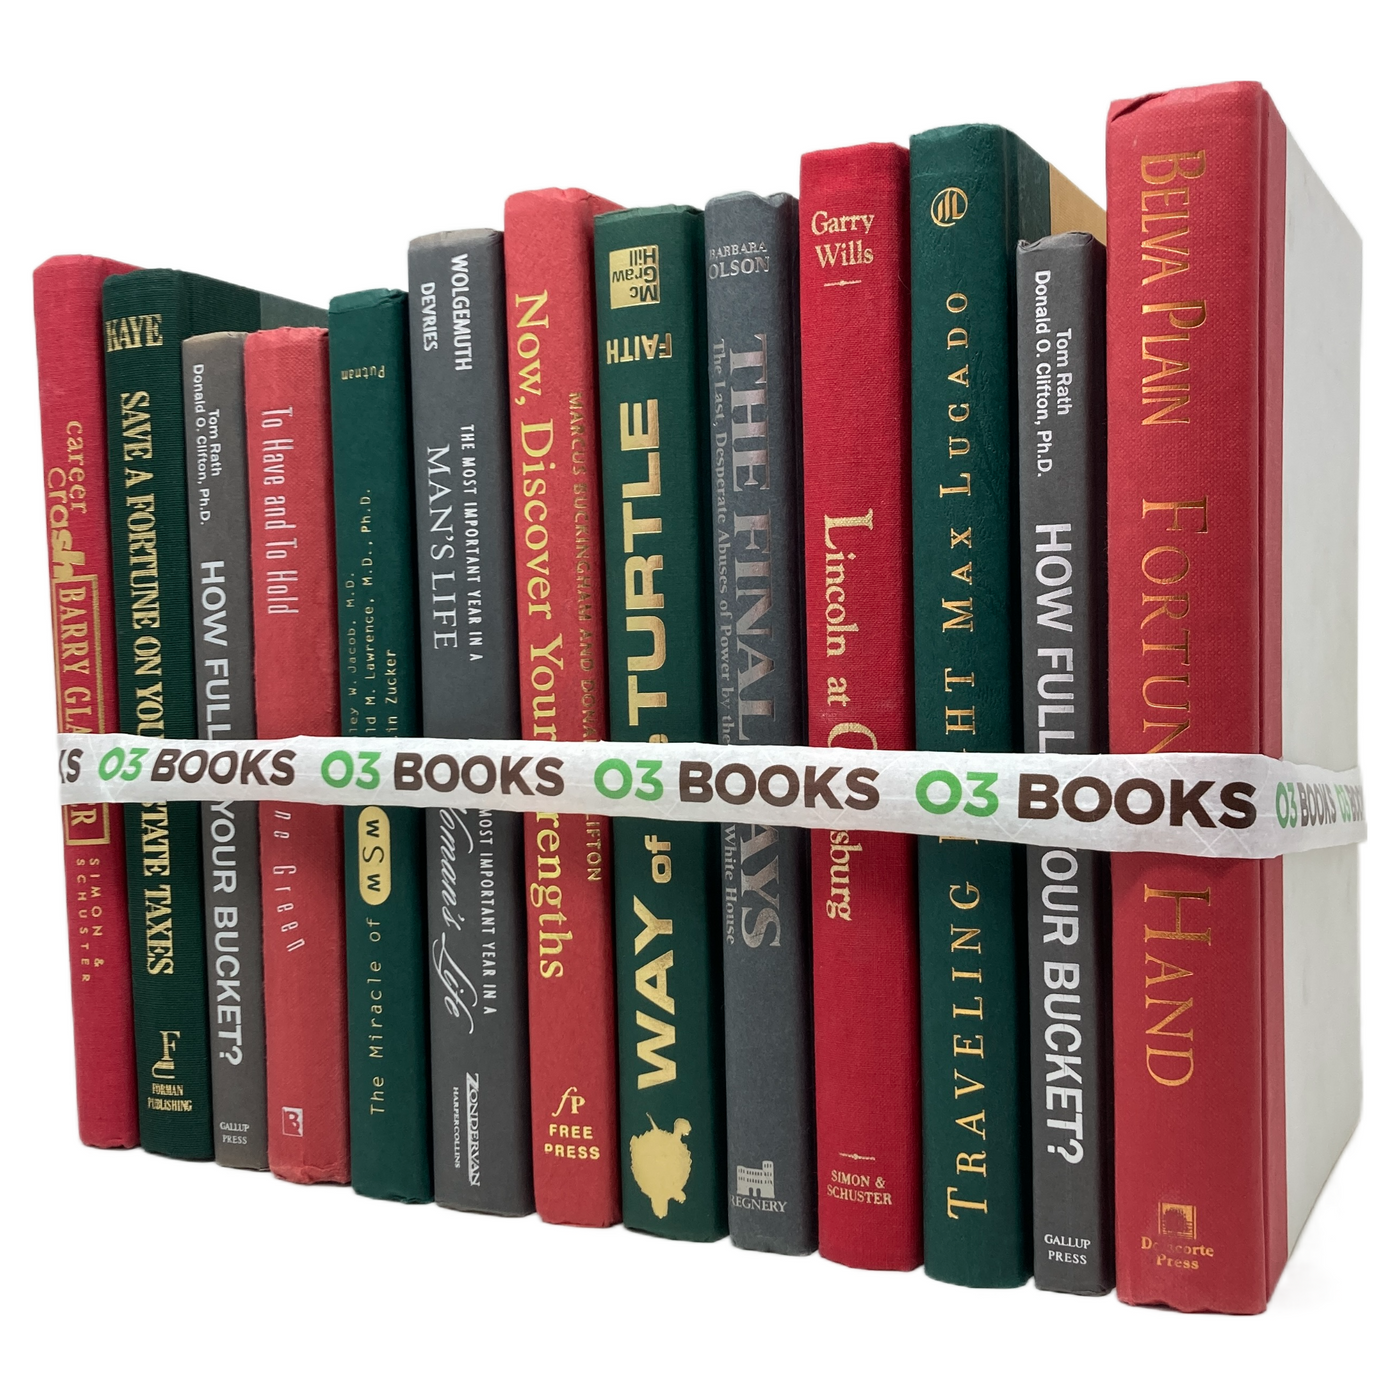 Cherry Blossom Decorative Books Red Green and Gray